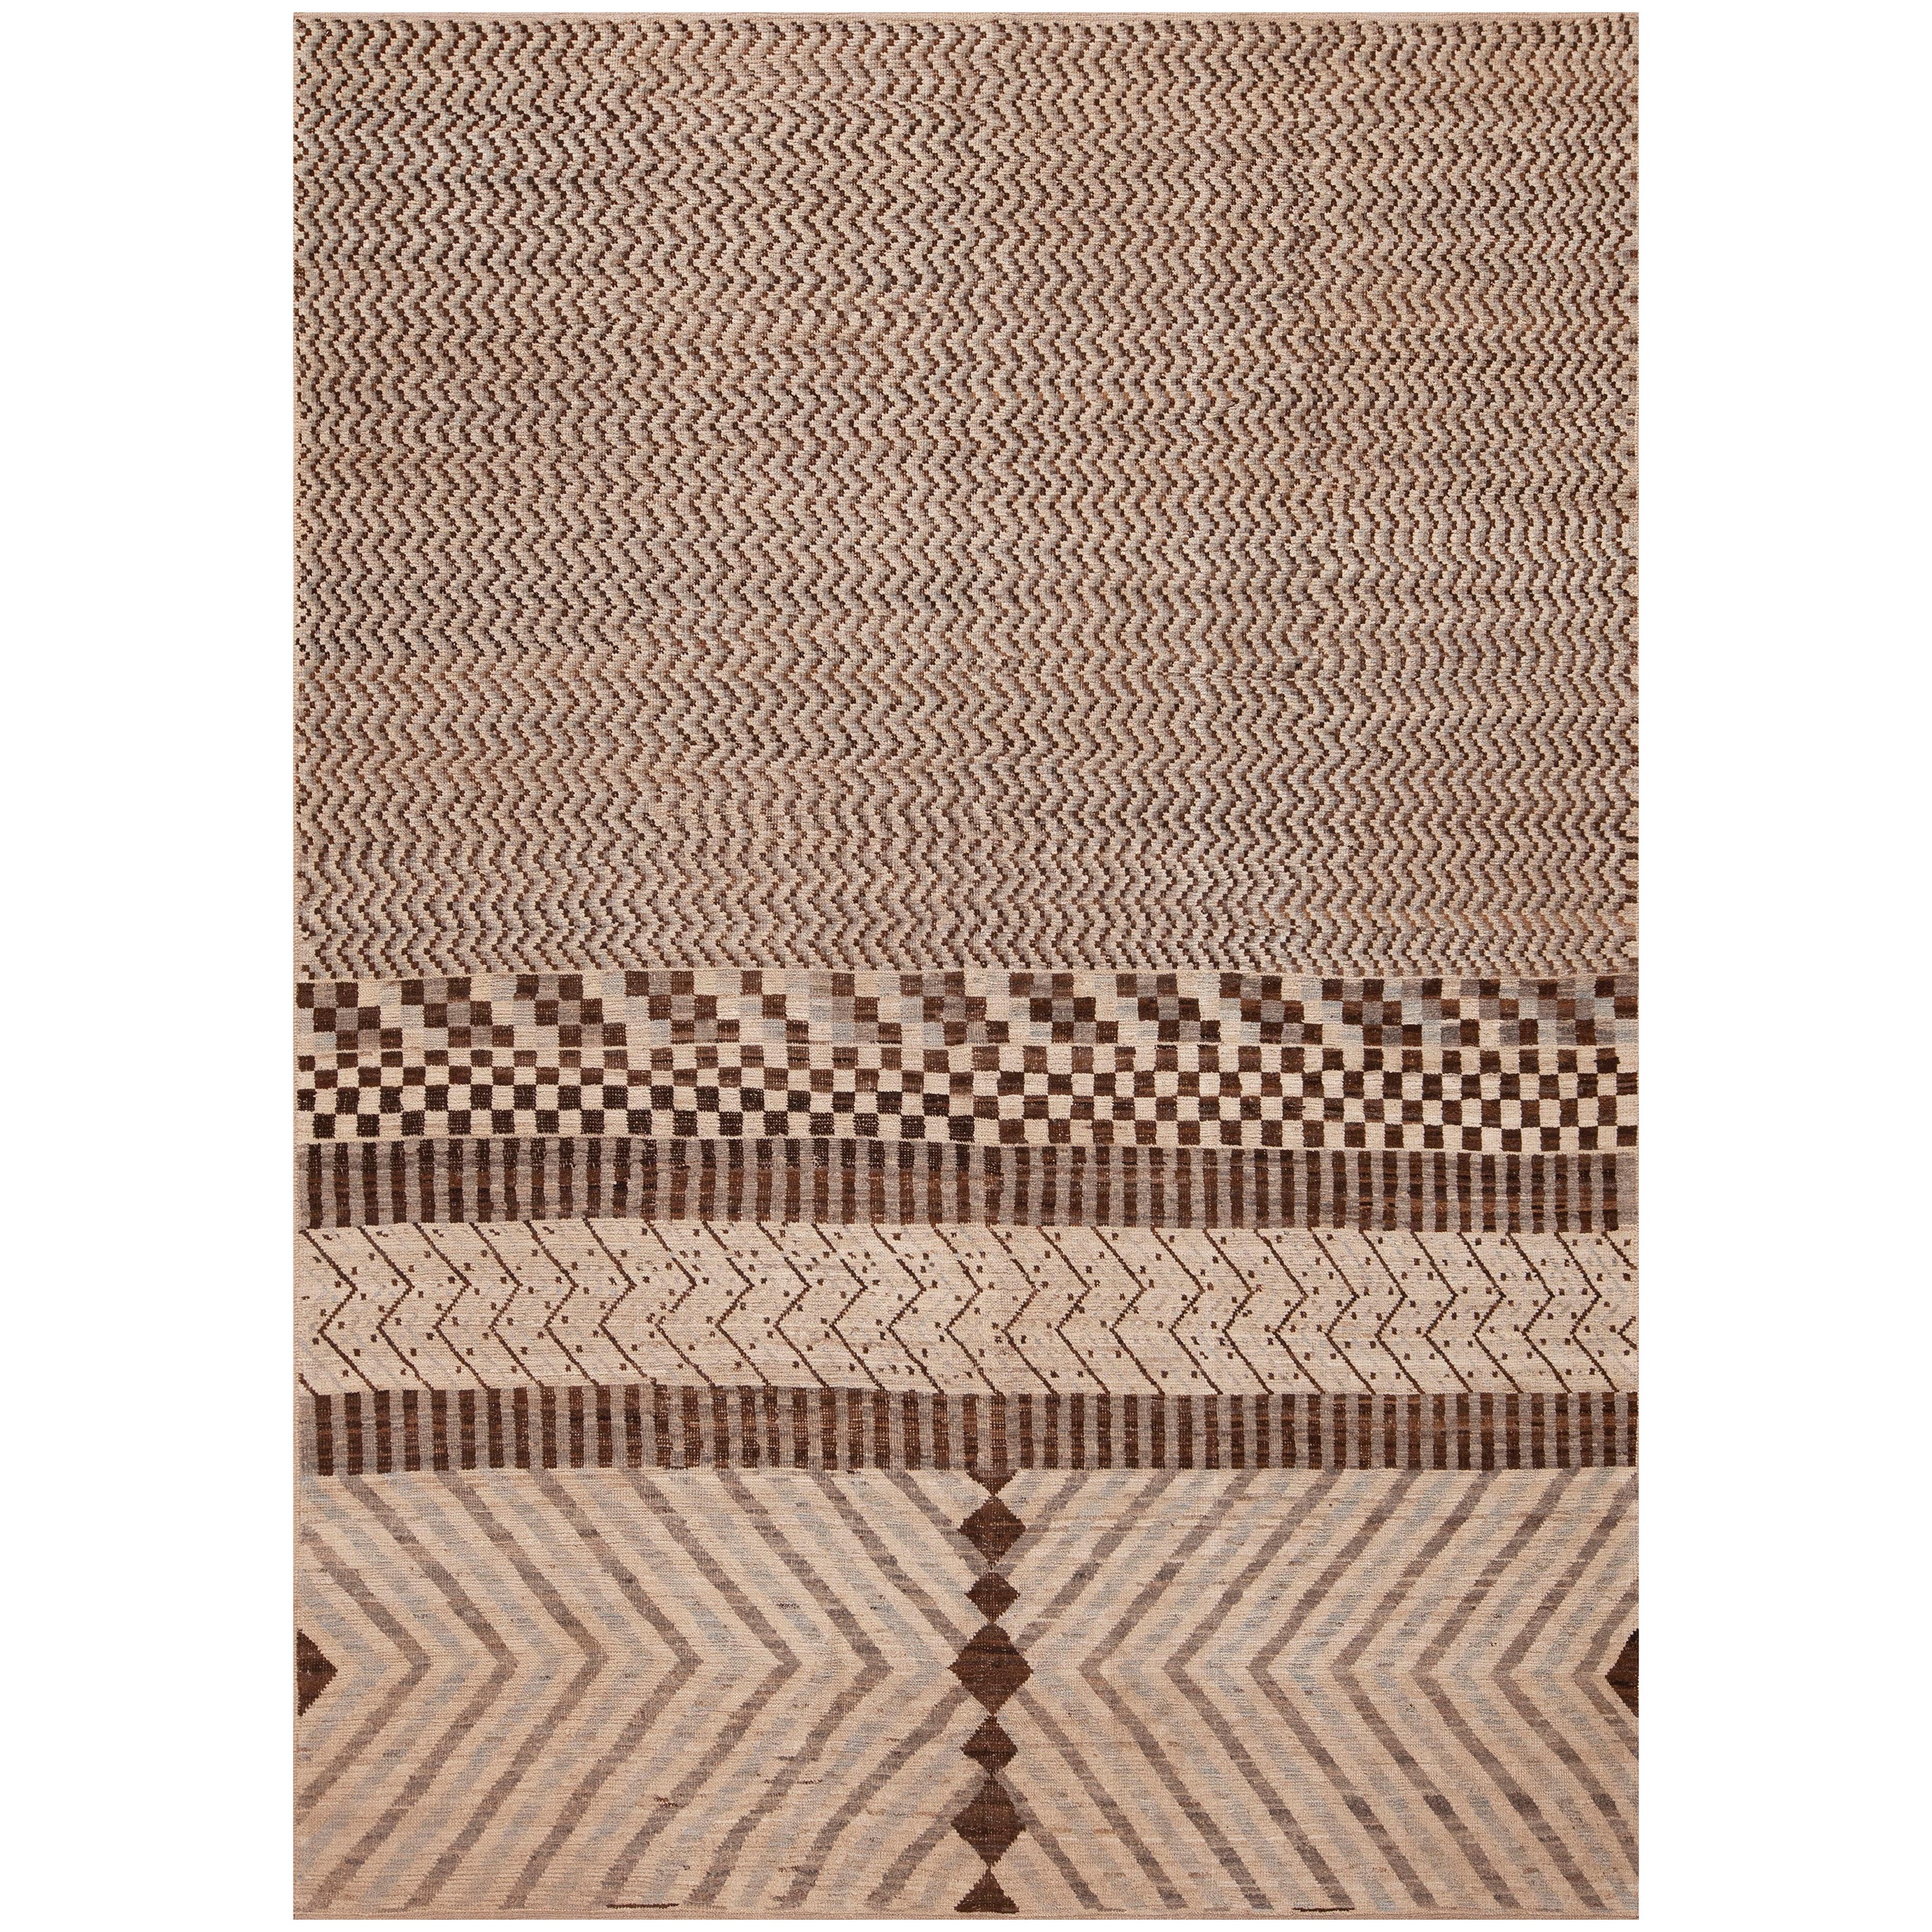 Nazmiyal Collection Modern Moroccan Berber Beni Ourain Design Rug 6'9" x 9'8" For Sale